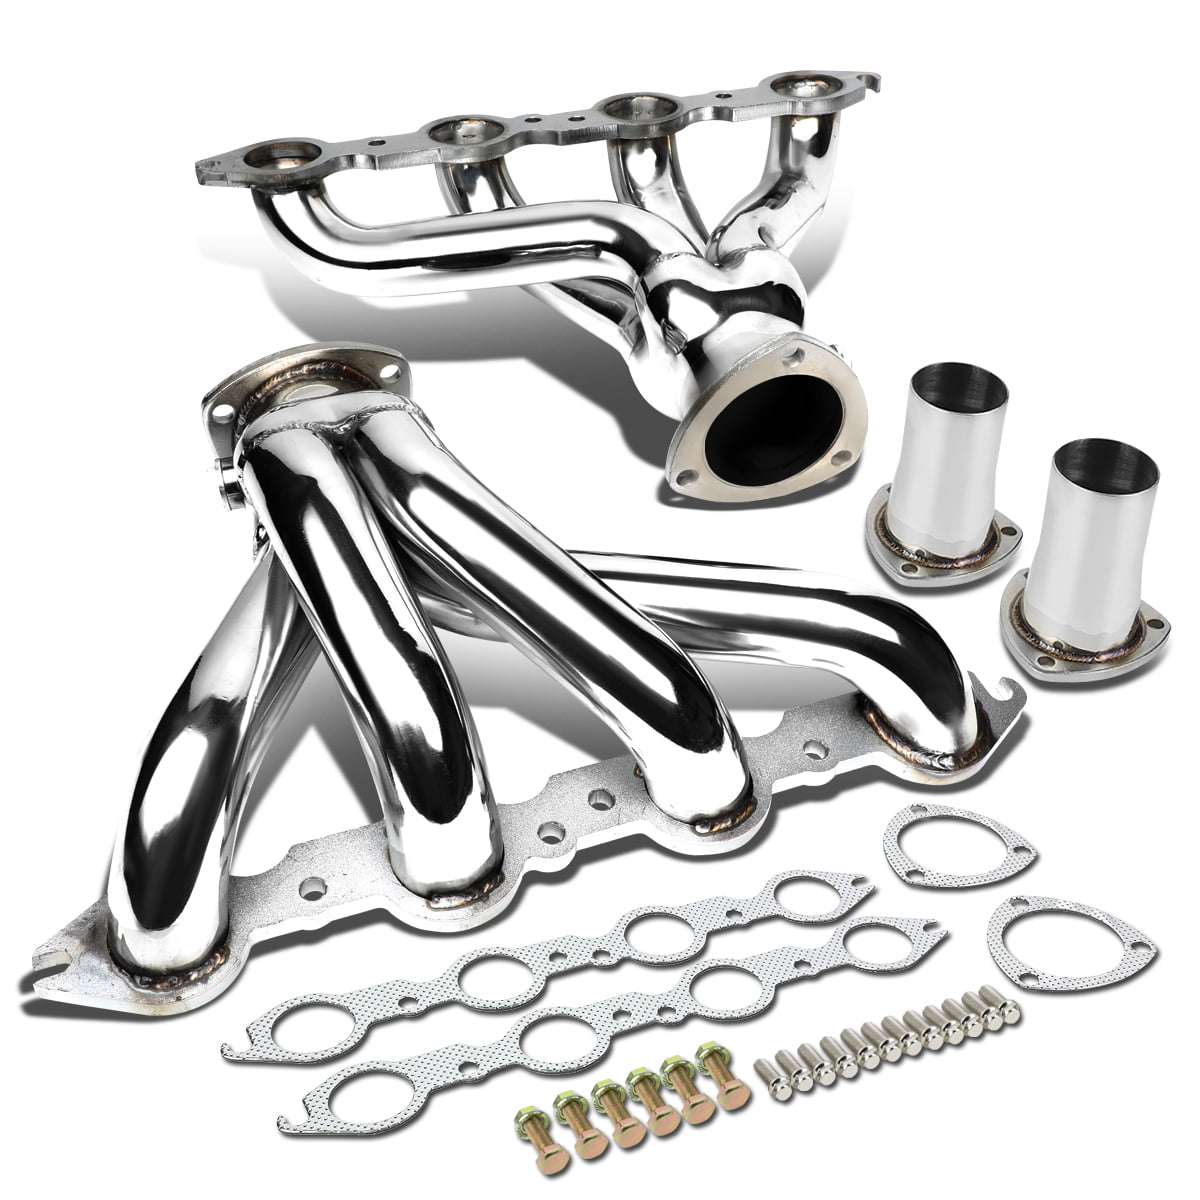 DEMOTOR For BBC Camaro Chevelle Steel Black Coated Shorty Headers Chevy 396 402 427 454 502